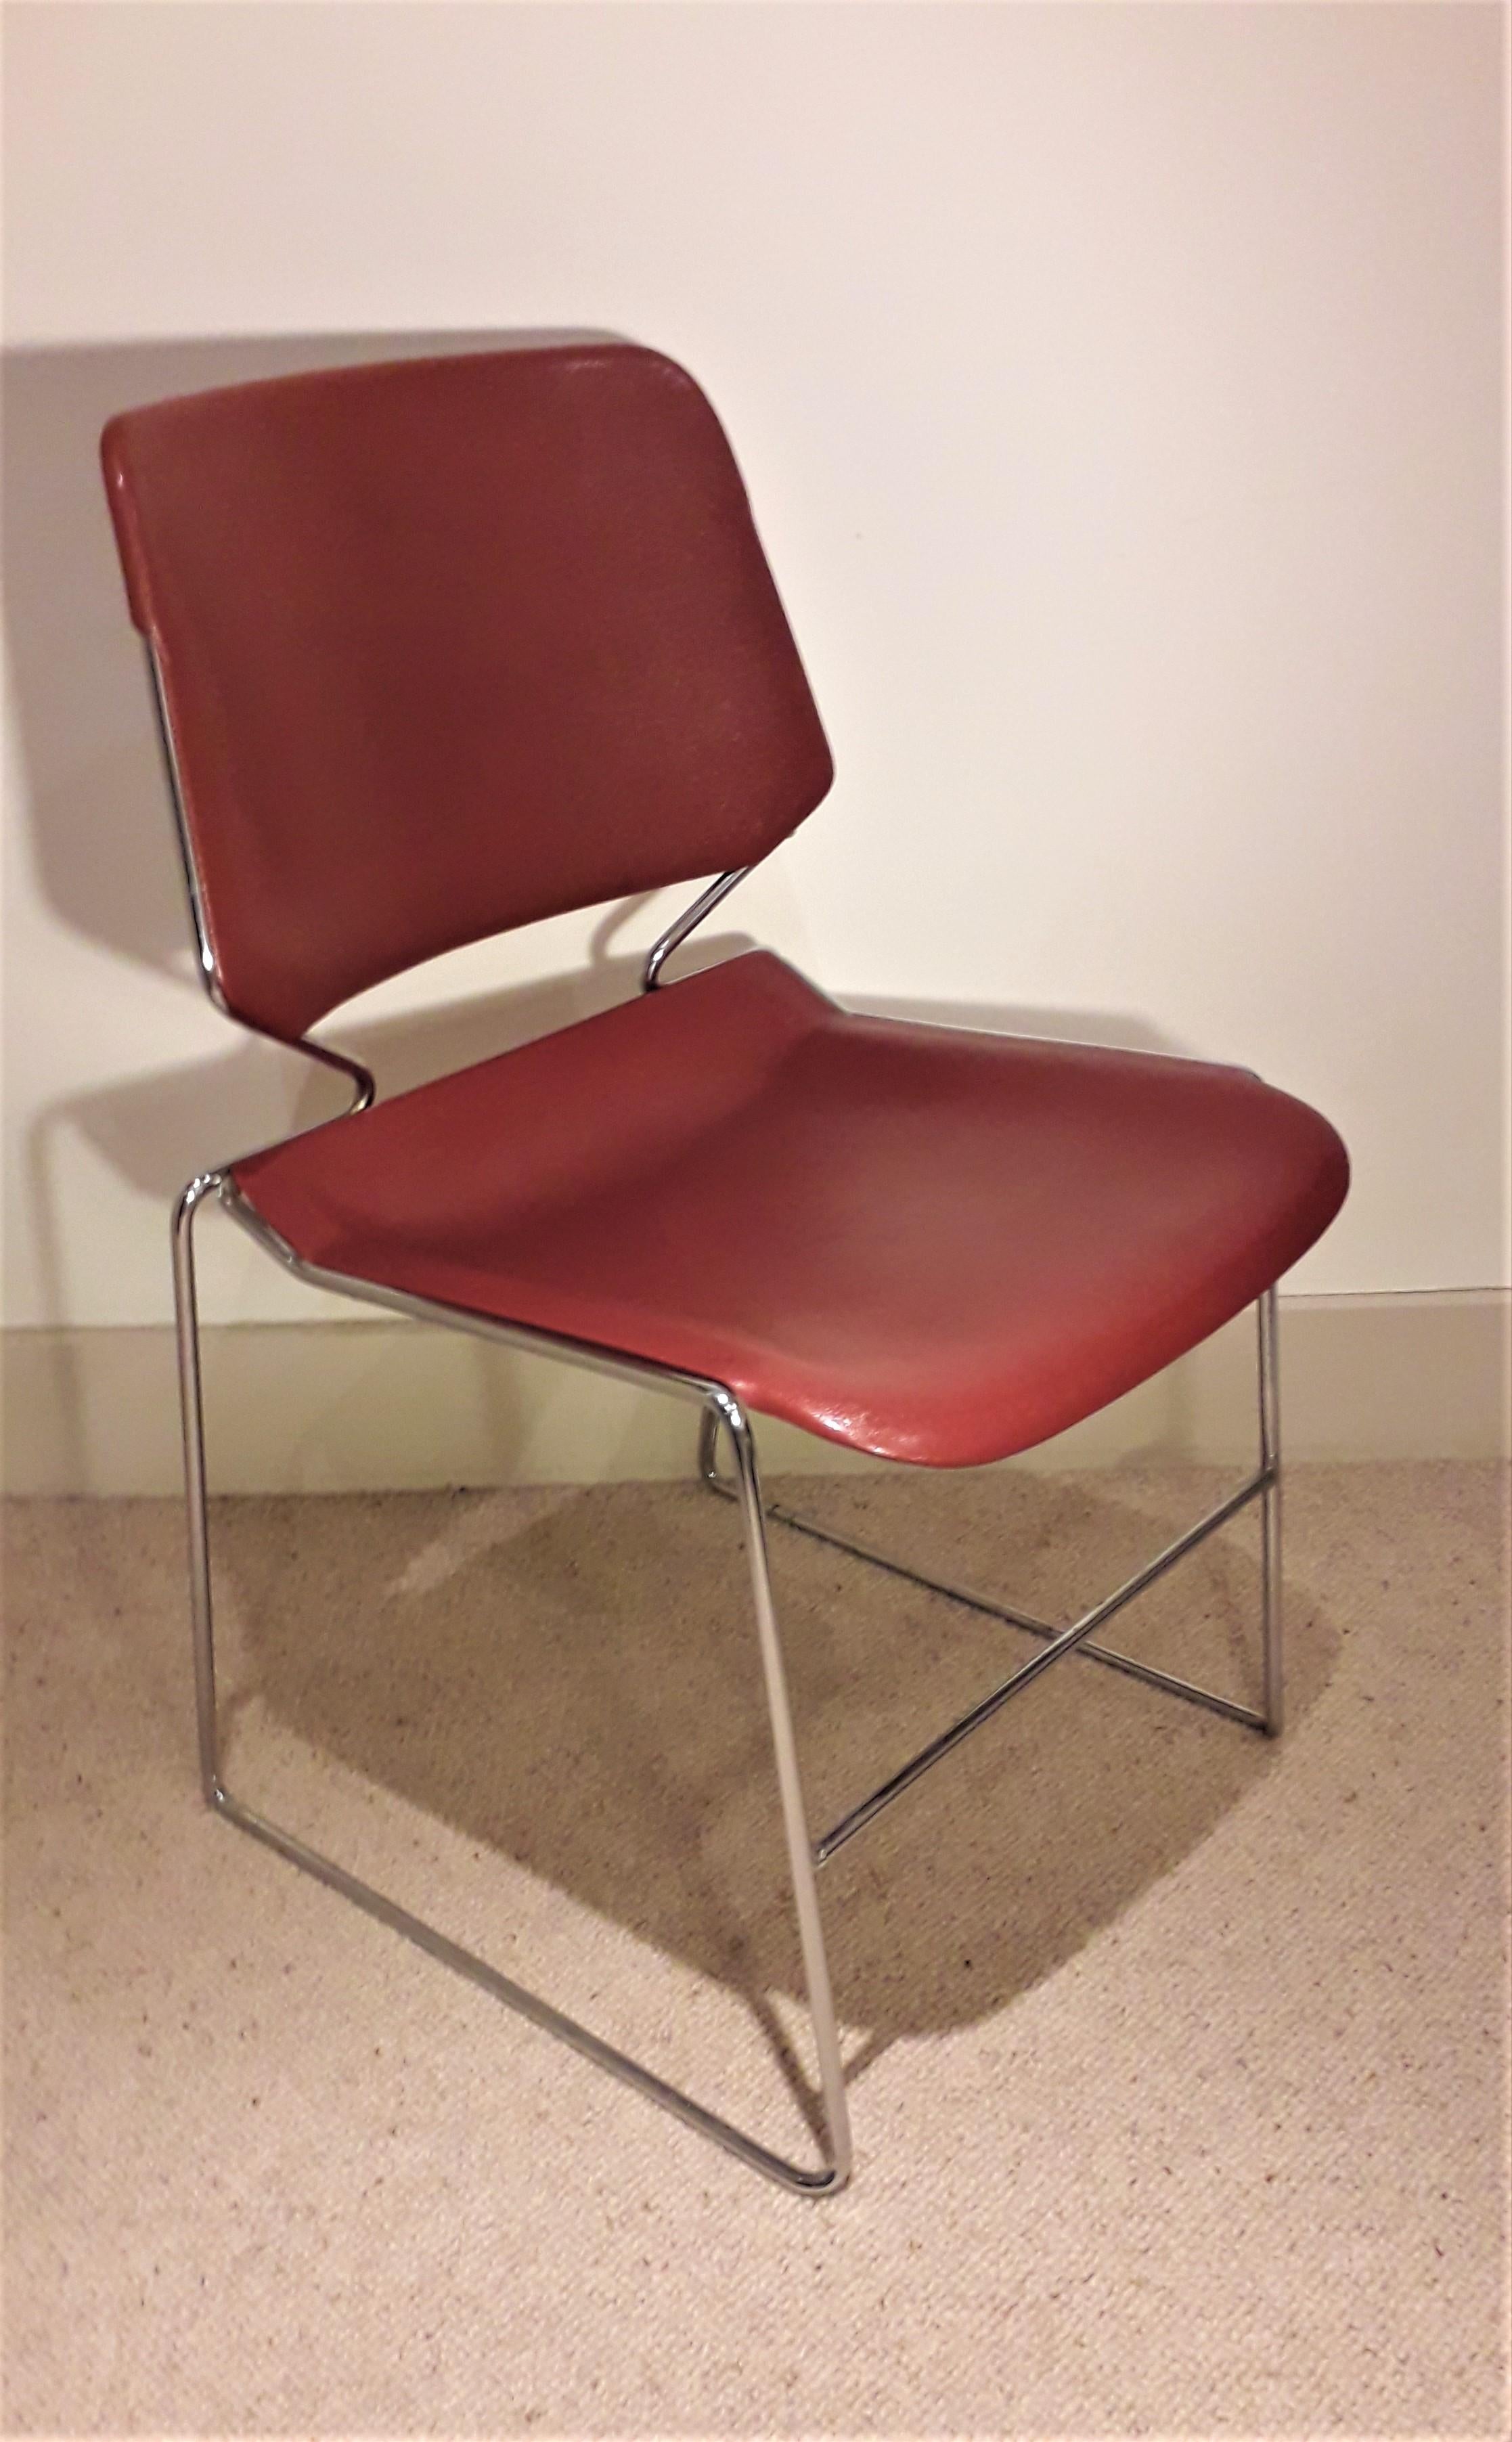 Set of four stackable midcentury Krueger Matrix chair
Manufactured in the USA in the 1970s
Clean and minimalistic design by Thomas Tolleson

Chairs are very comfortable and condition overall is good with the odd barely noticeable old mark, all